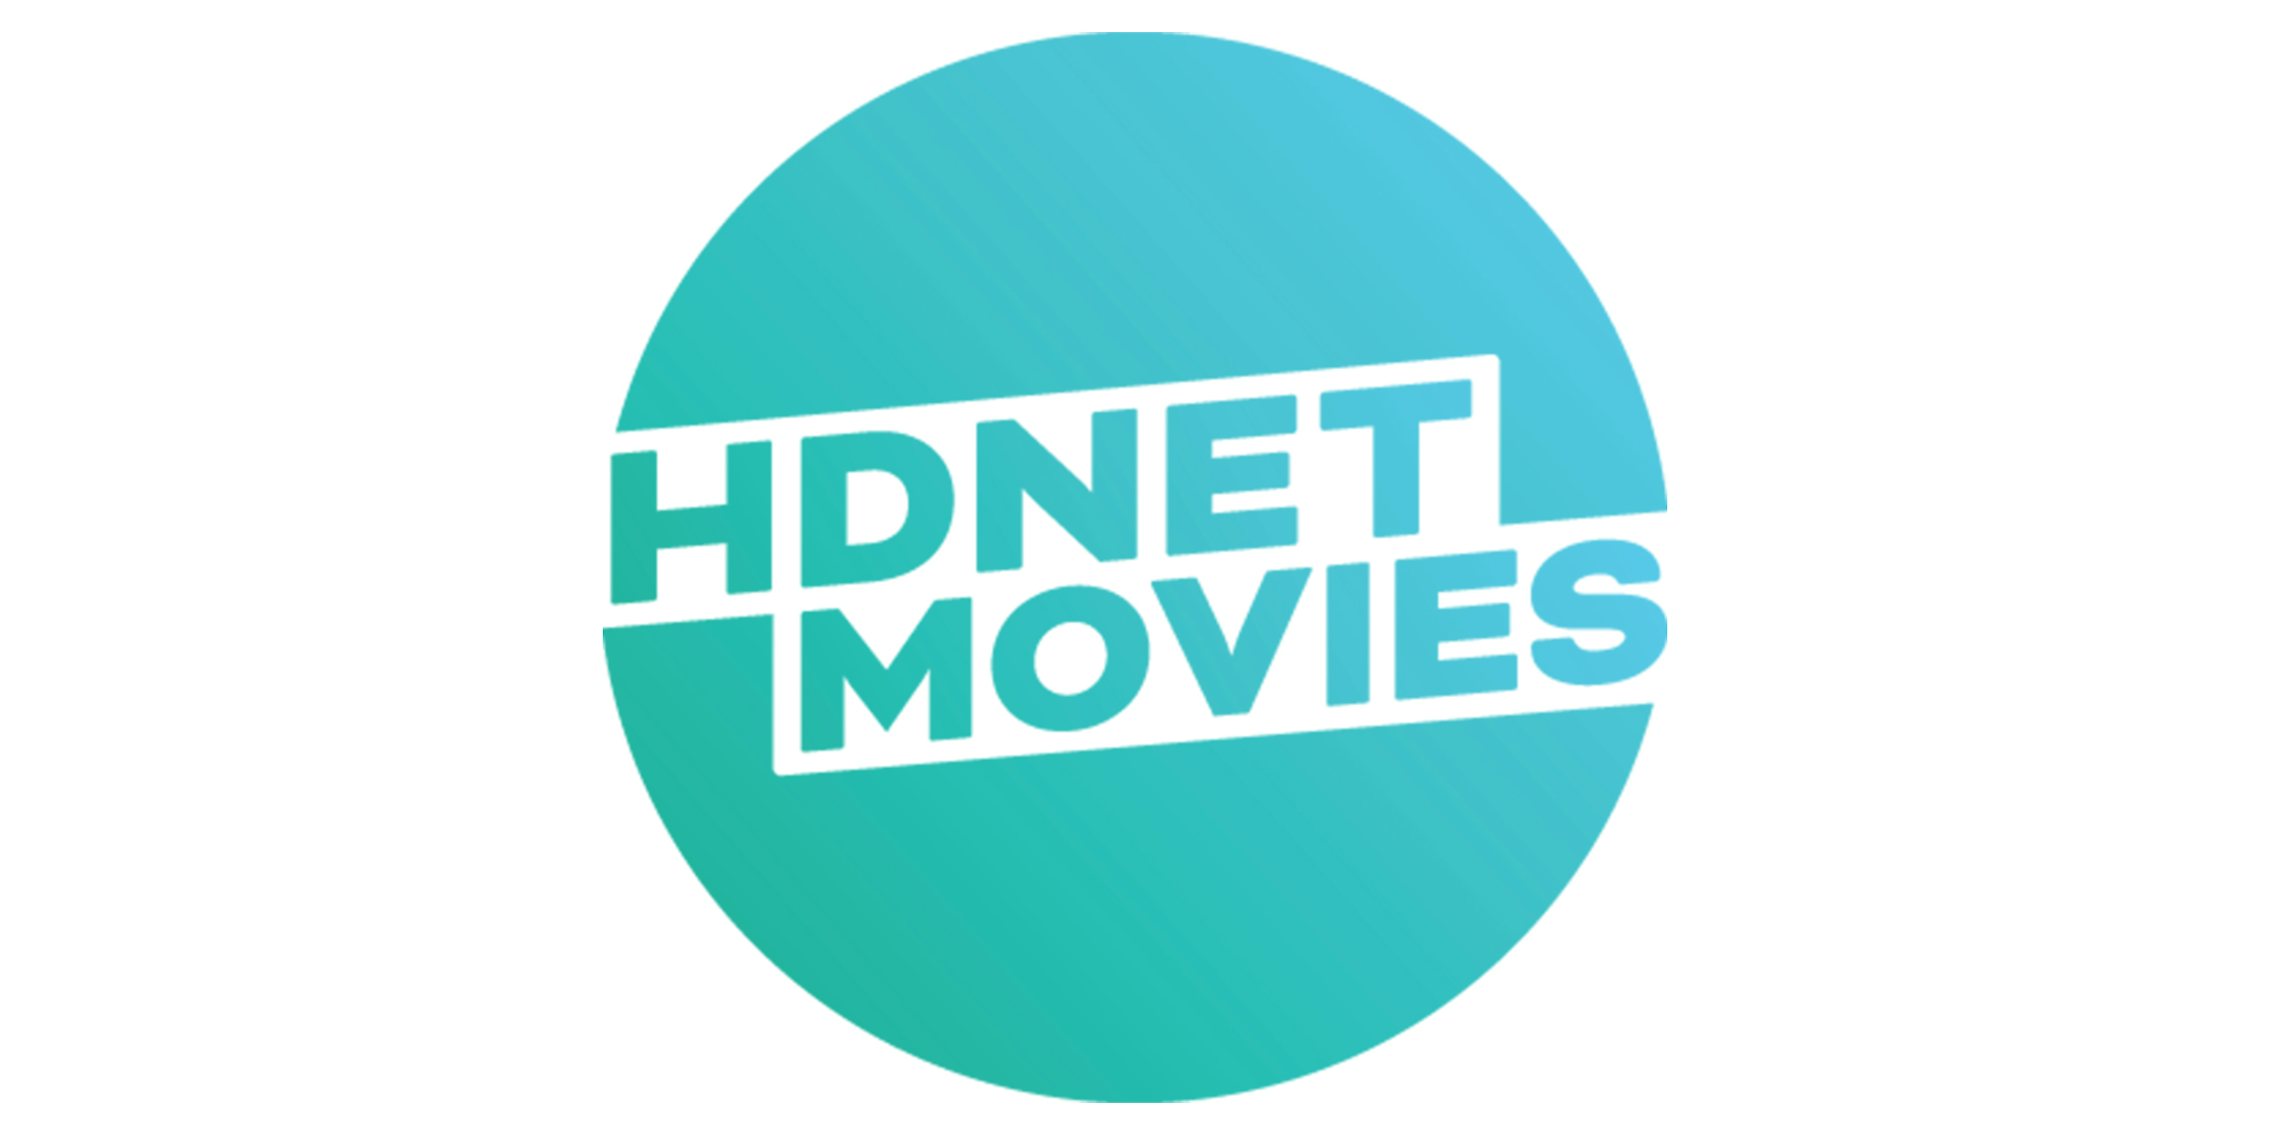 hdnet movies live stream